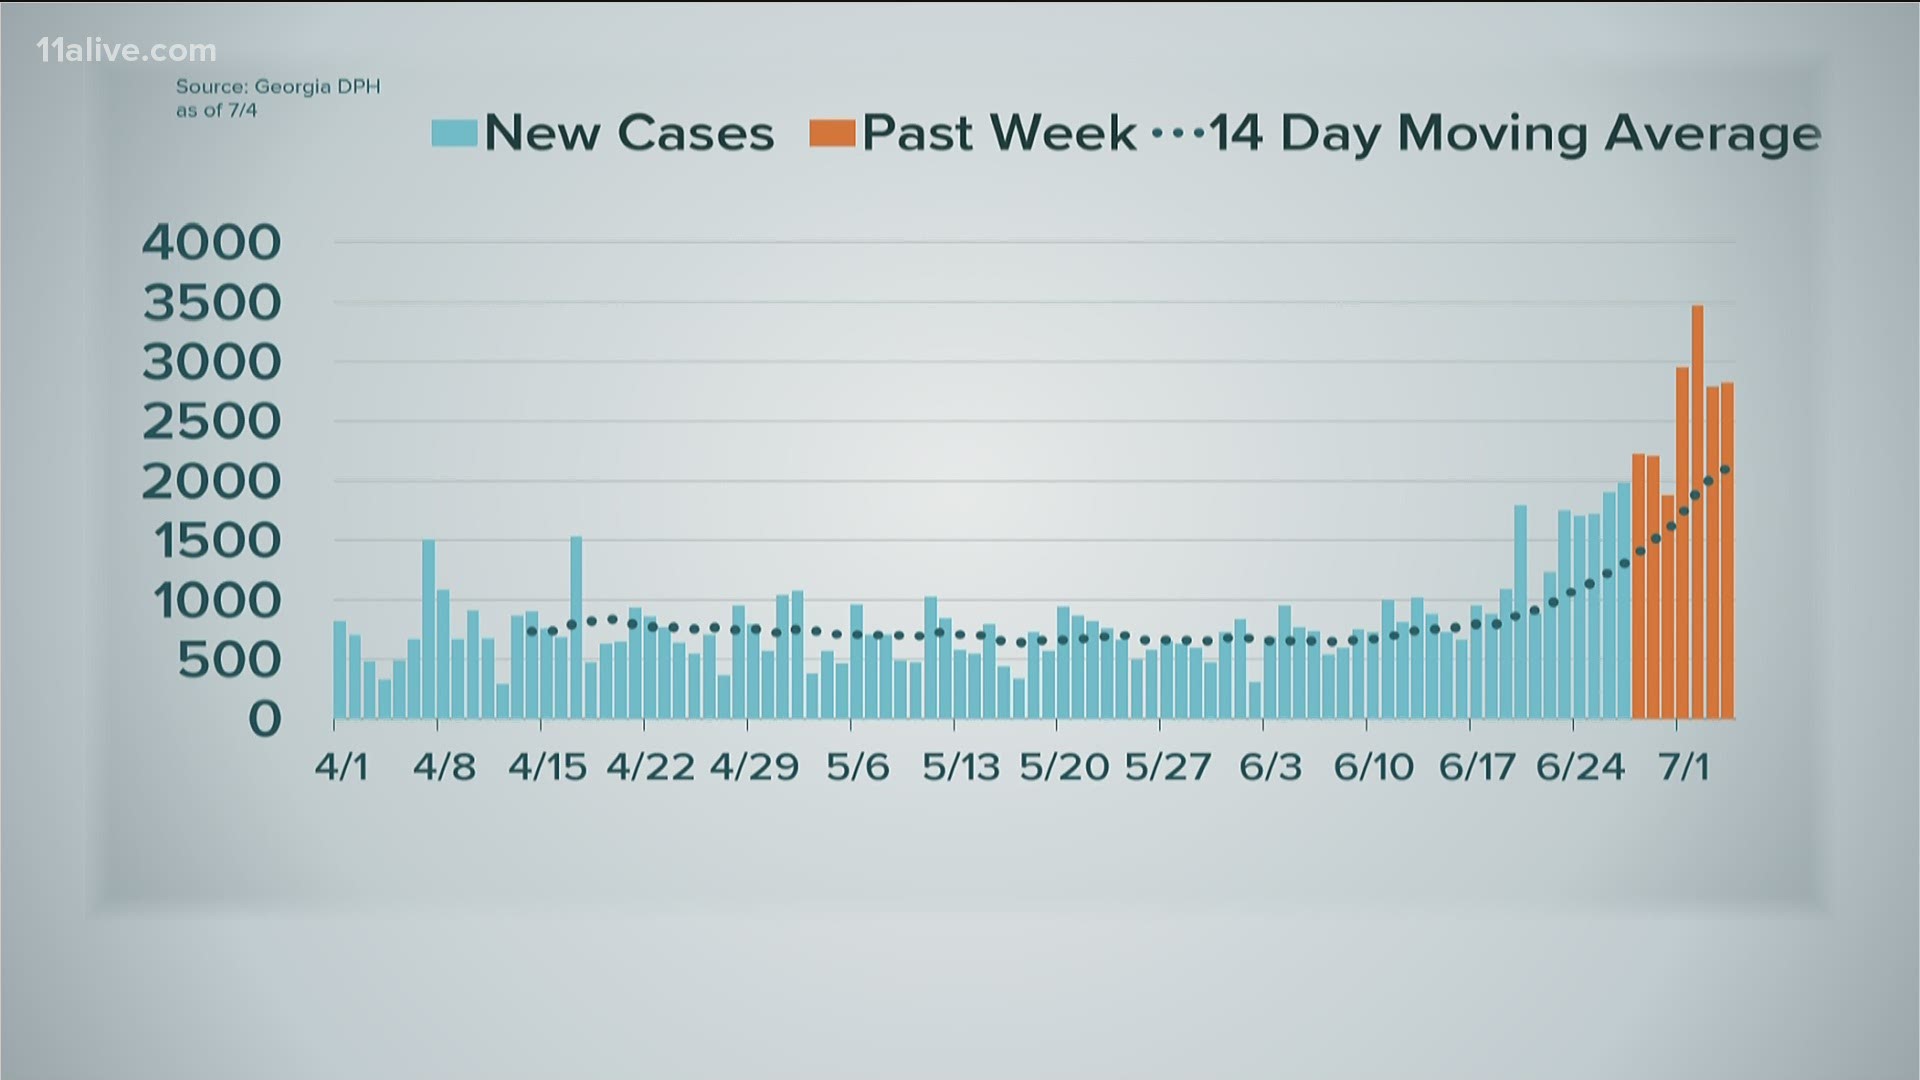 Saturday brought the third-highest daily increase in COVID-19 cases on record.